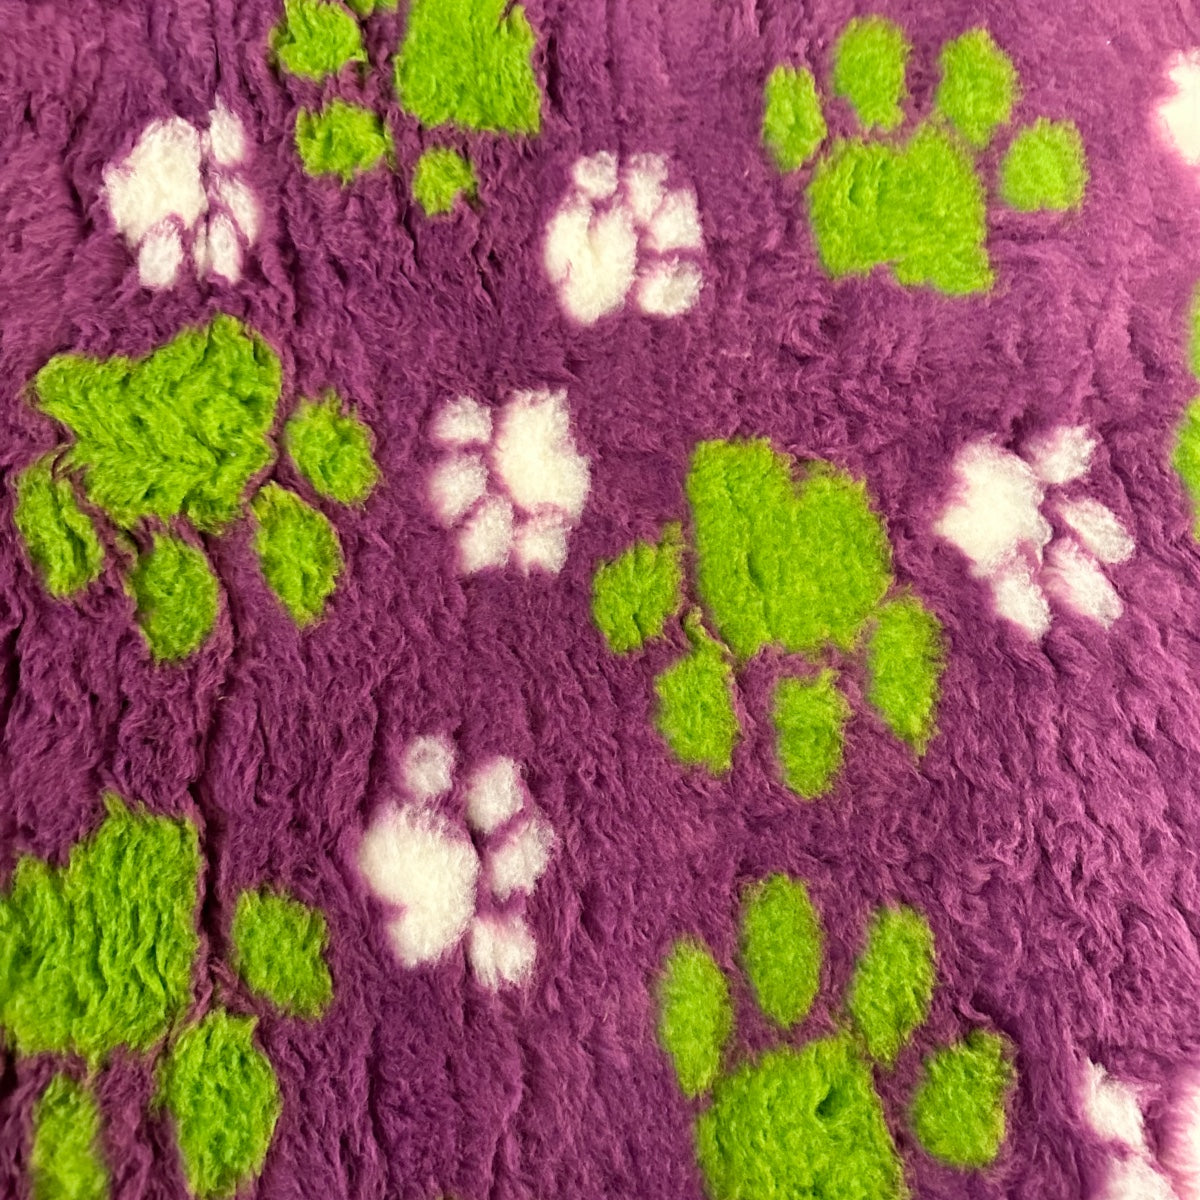 Dry Bed (Vet Bed) - Non Slip Purple with Paw Prints